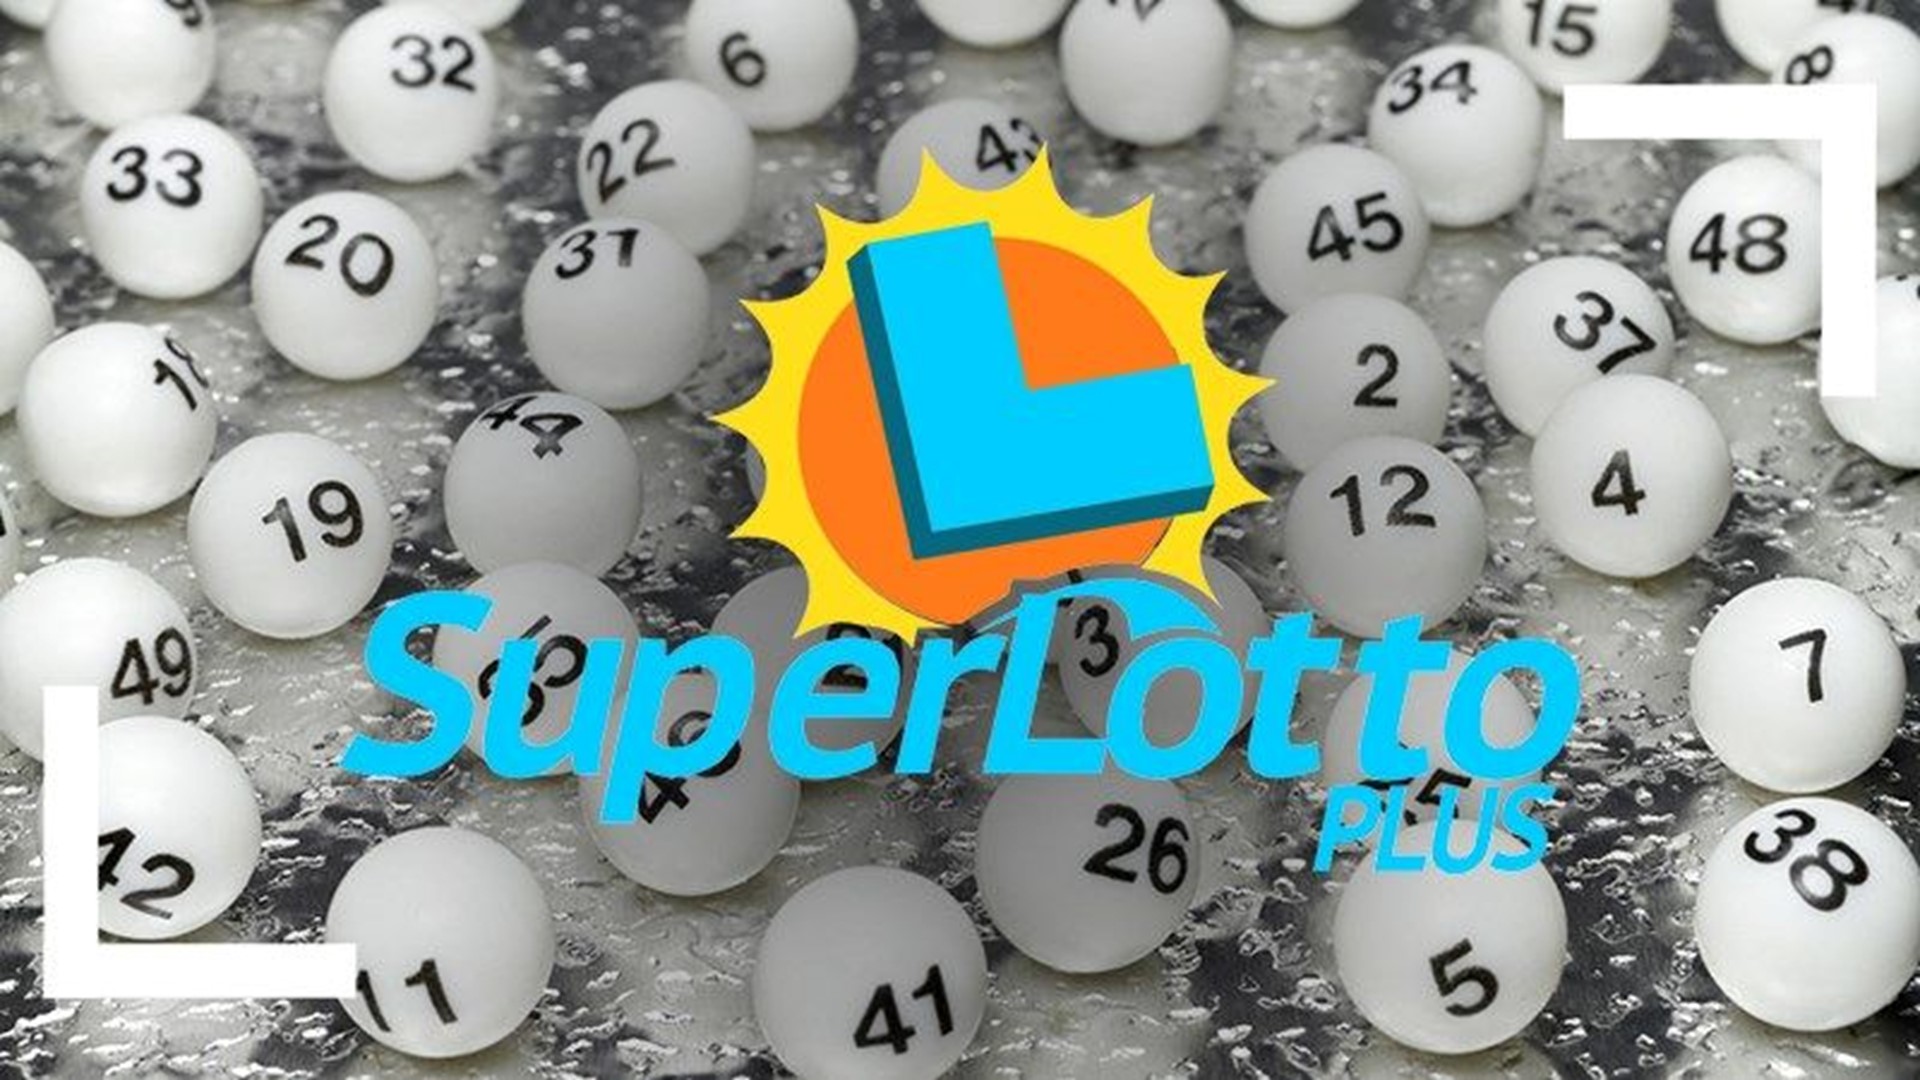 SuperLotto Plus winner claims 28M prize in San Diego County